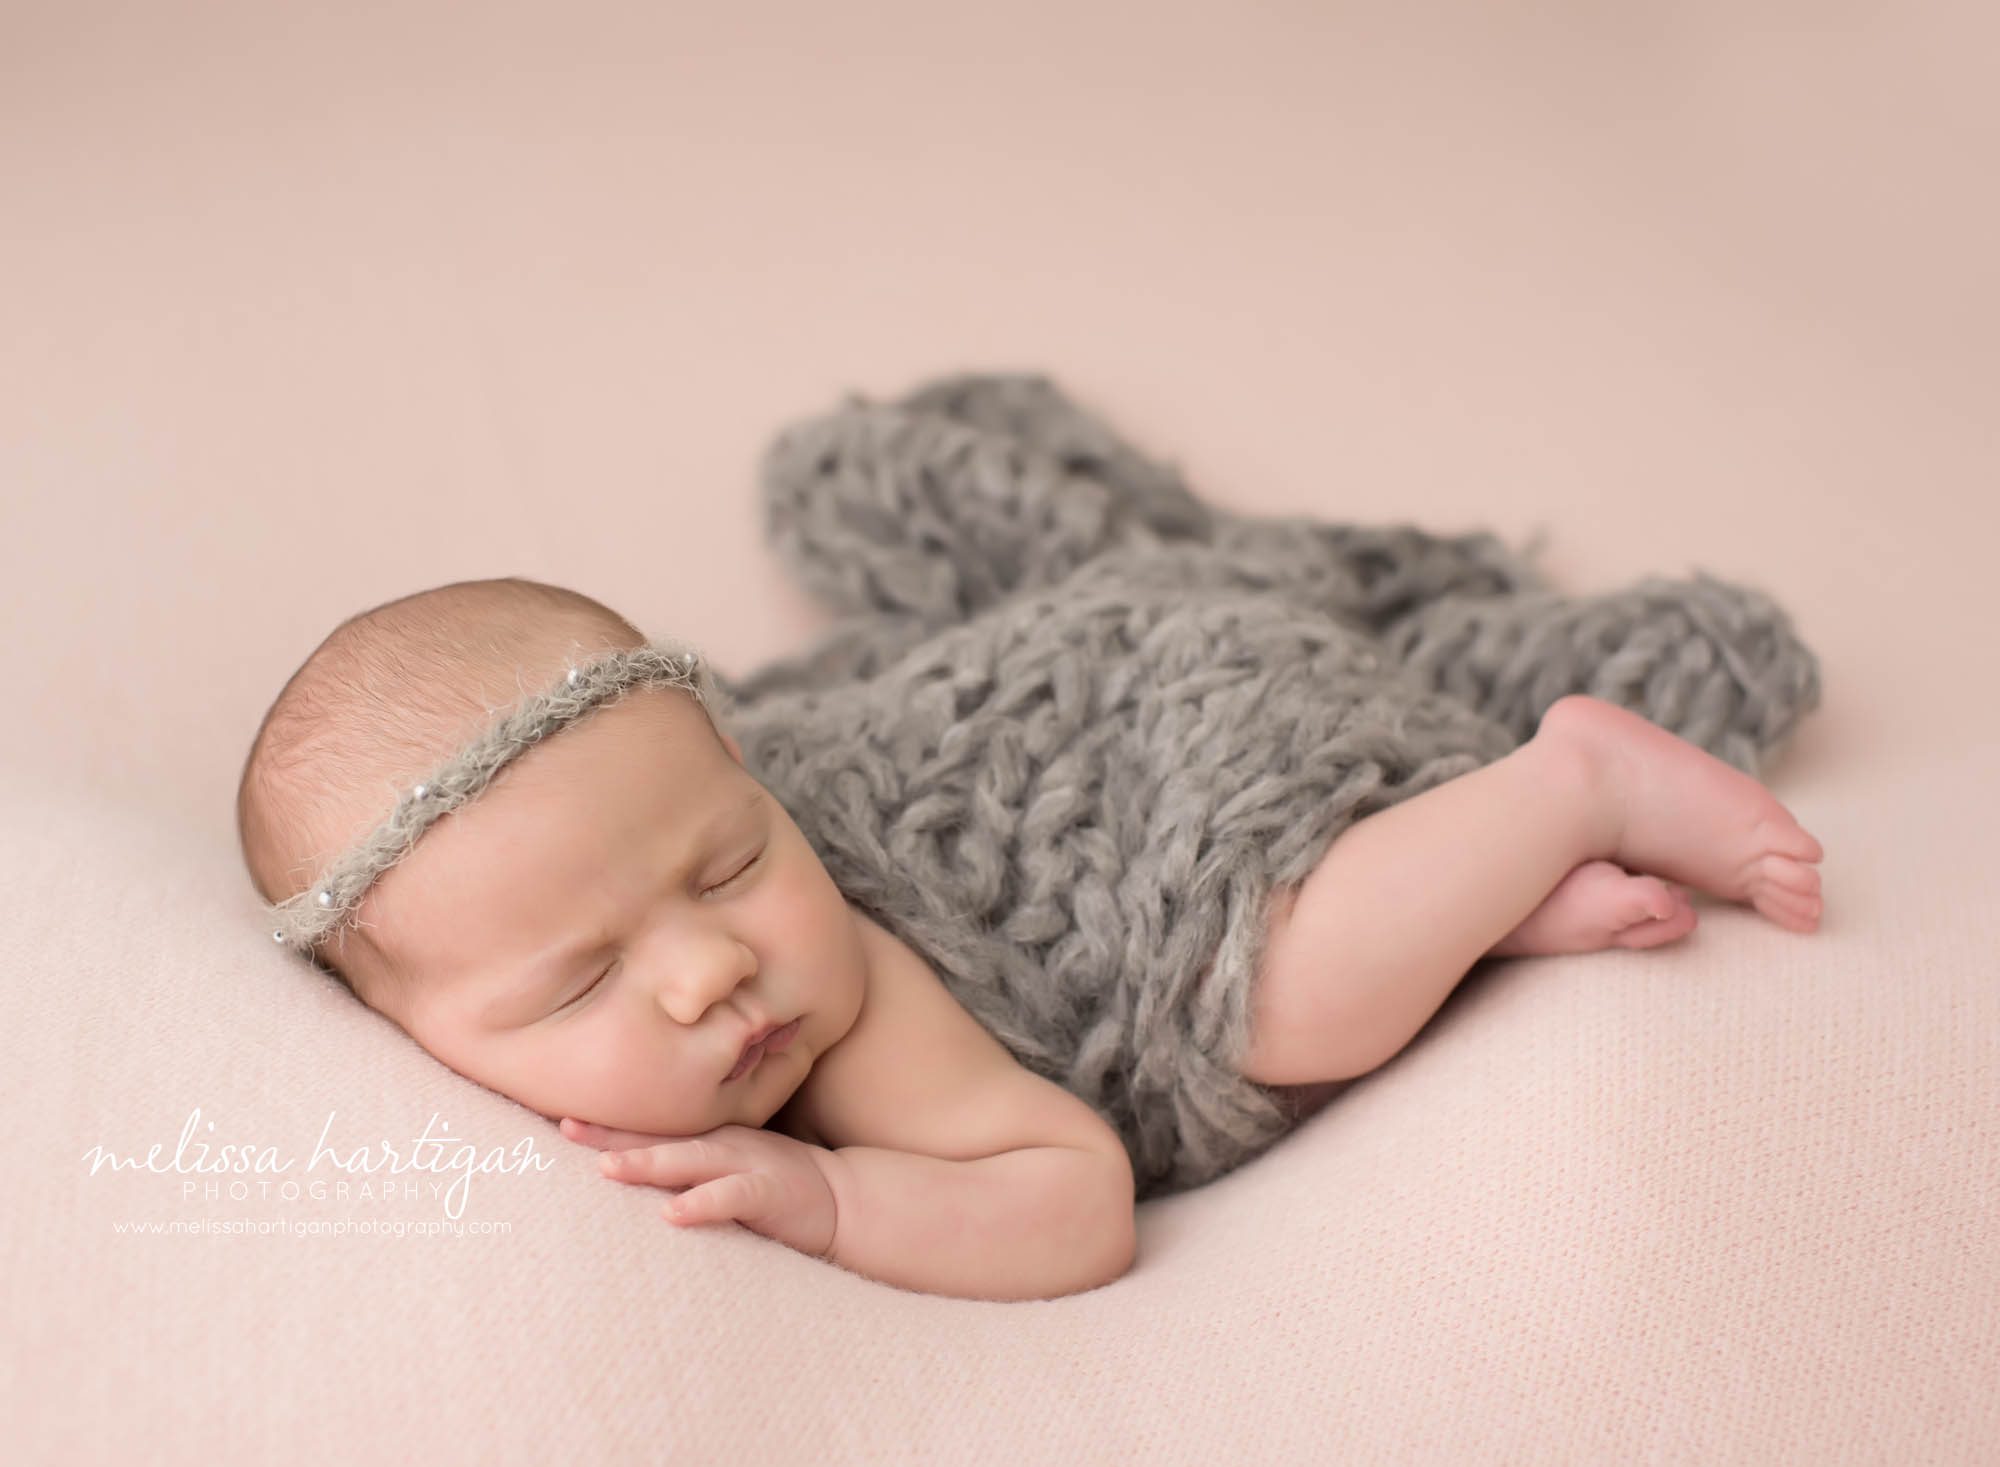 Newborn baby girl posed on side with light gray headband and knitted layer connecticut newborn photography